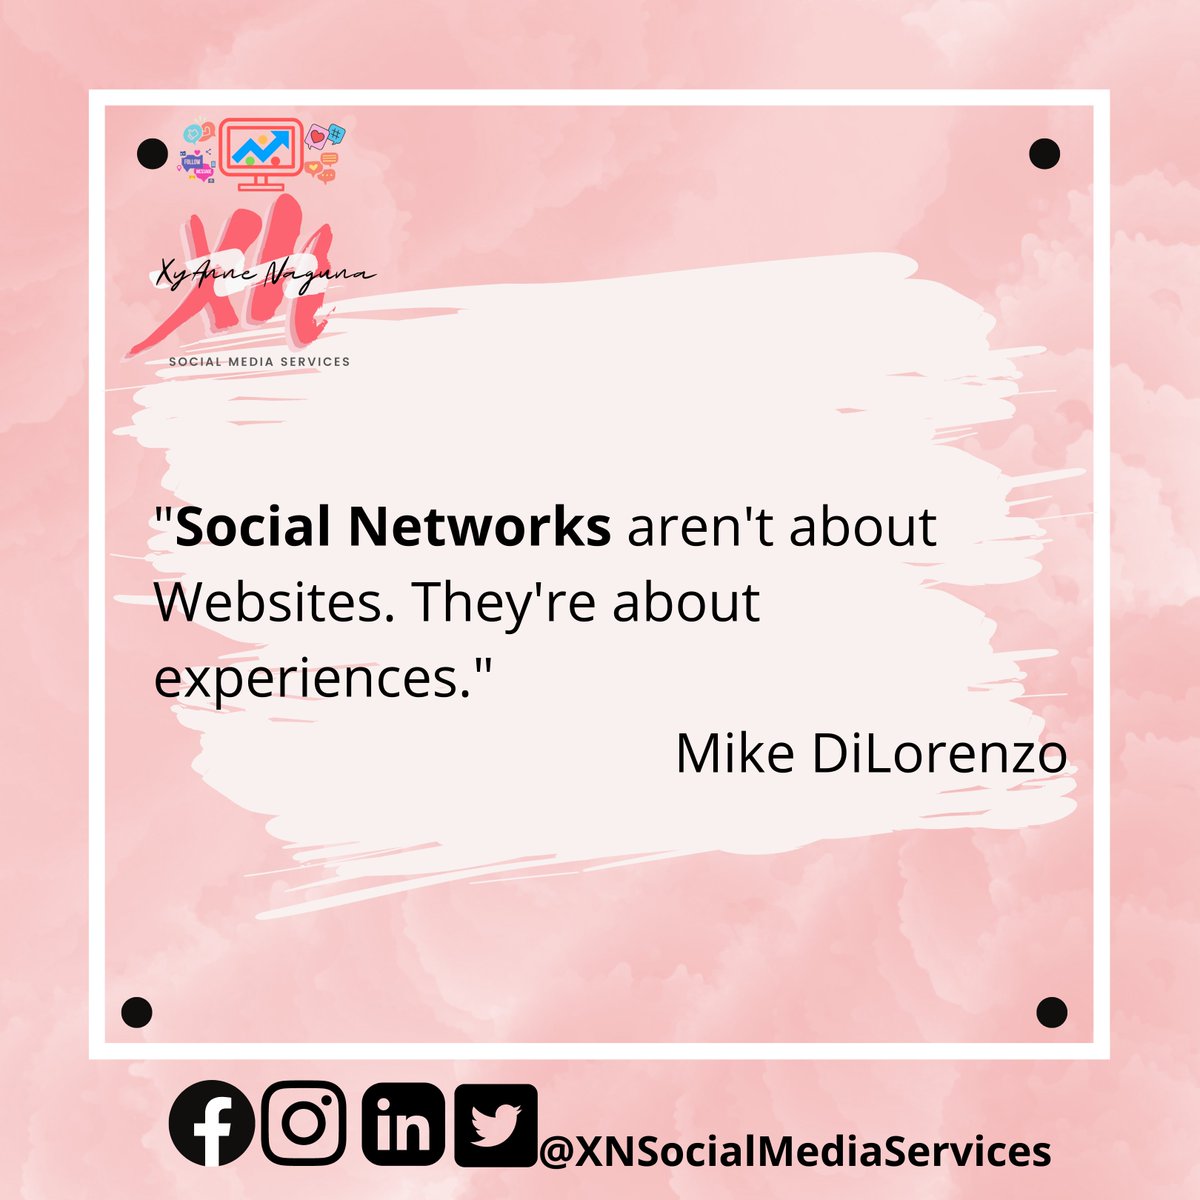 To give a positive experience to potential customers while taking care of the business is one of the best encounters you can provide as a social media marketer. 👍 

#XNSocialMediaServices
#XNSocialMediaMarketing
#socialmediaservicesforbusiness
#businesssolutions
#marketing